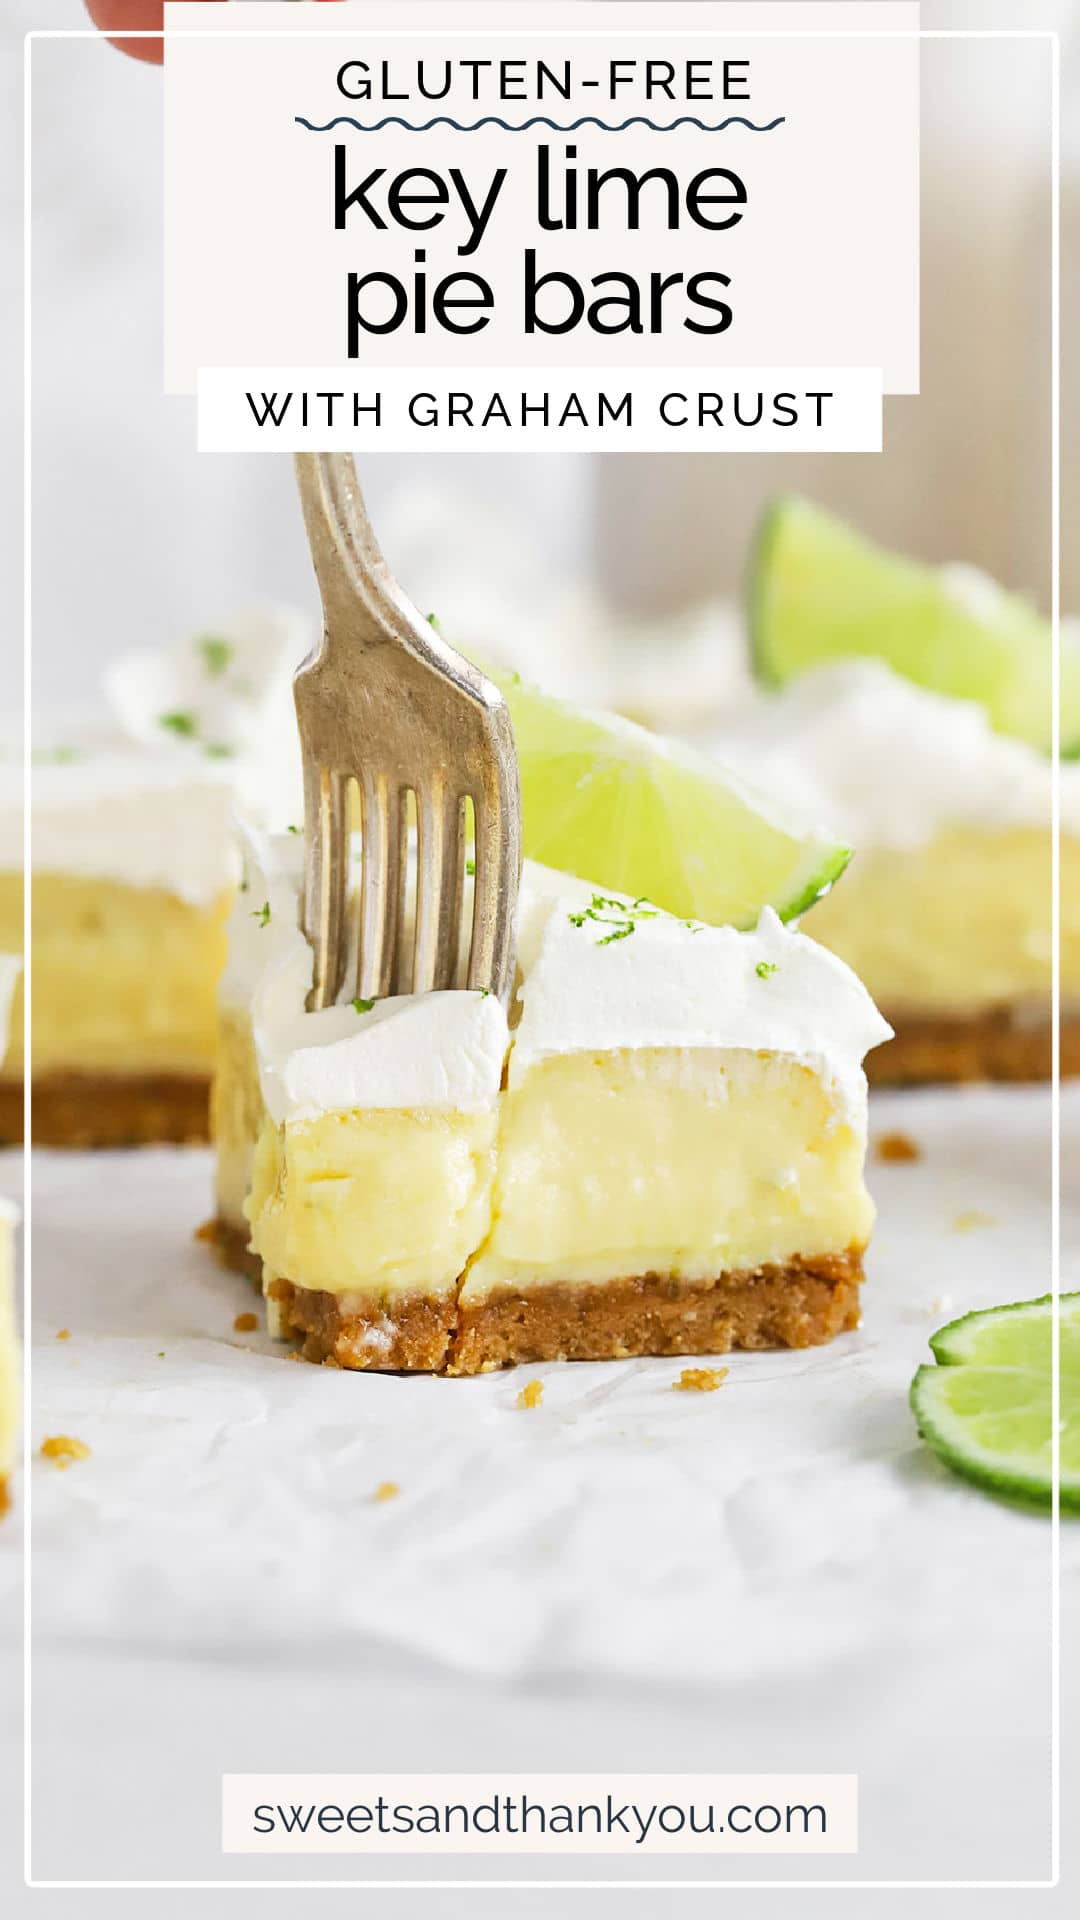 Gluten-Free Key Lime Pie Bar - Everything you love about key lime pie made easier! These key lime pie bars are fresh, bright, and so easy to make! // gluten-free key lime pie // gluten free pie bars // easy key lime pie // key lime pie filling // gluten free graham cracker crust // gluten-free key lime pie filling // easy gluten-free dessert // summer recipes // gluten free pie // 